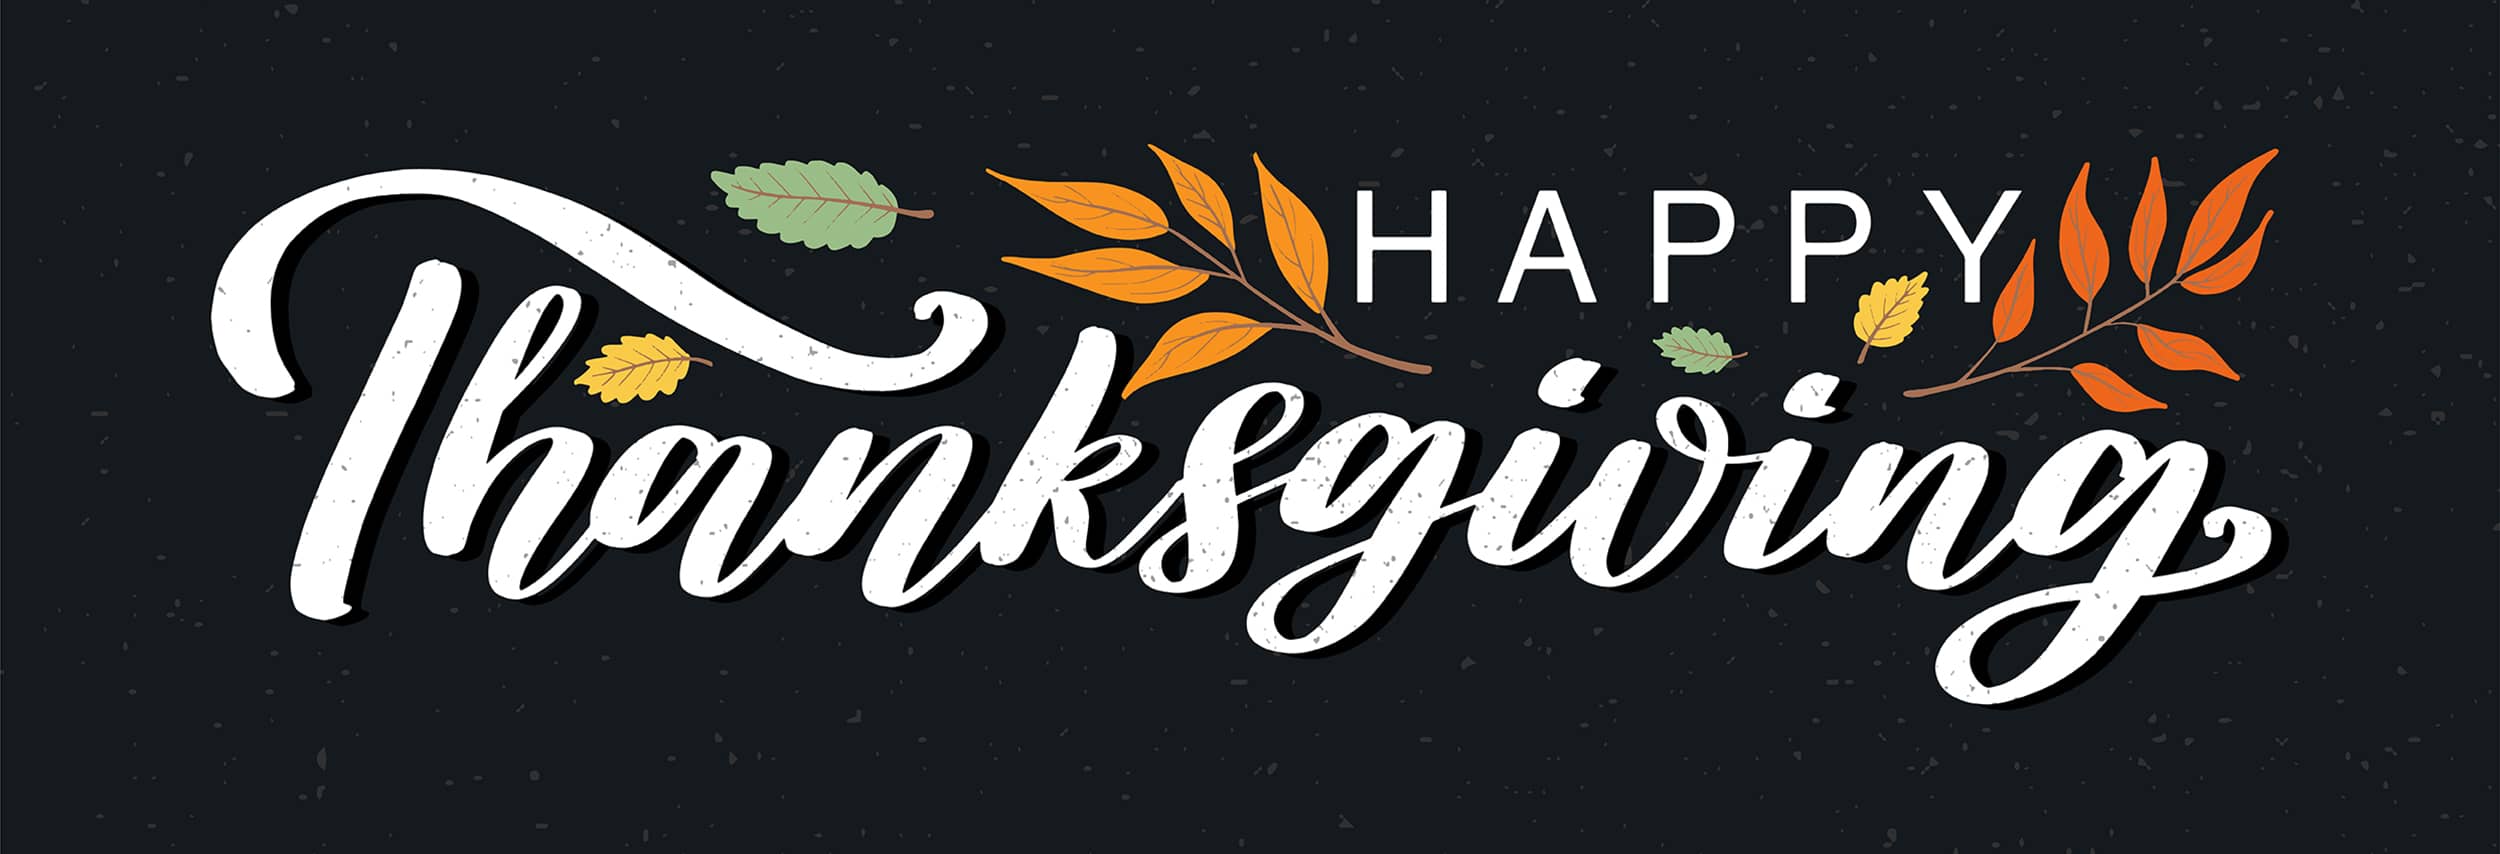 A banner that says Happy Thanksgiving as part of the thanksgiving getaway page